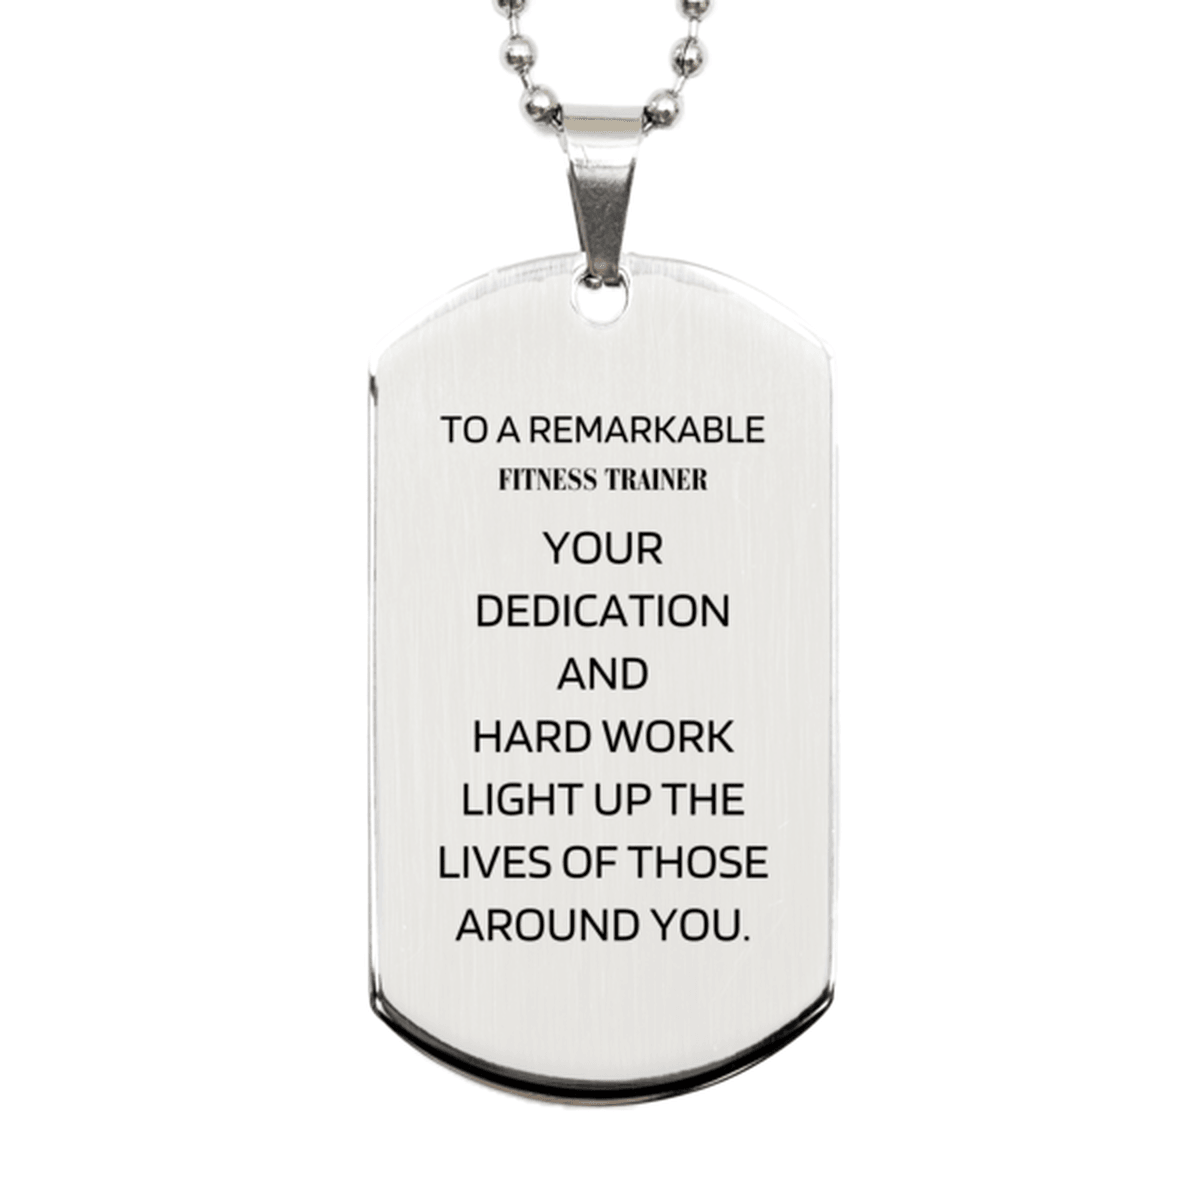 Remarkable Fitness Trainer Gifts, Your dedication and hard work, Inspirational Birthday Christmas Unique Silver Dog Tag For Fitness Trainer, Coworkers, Men, Women, Friends - Mallard Moon Gift Shop